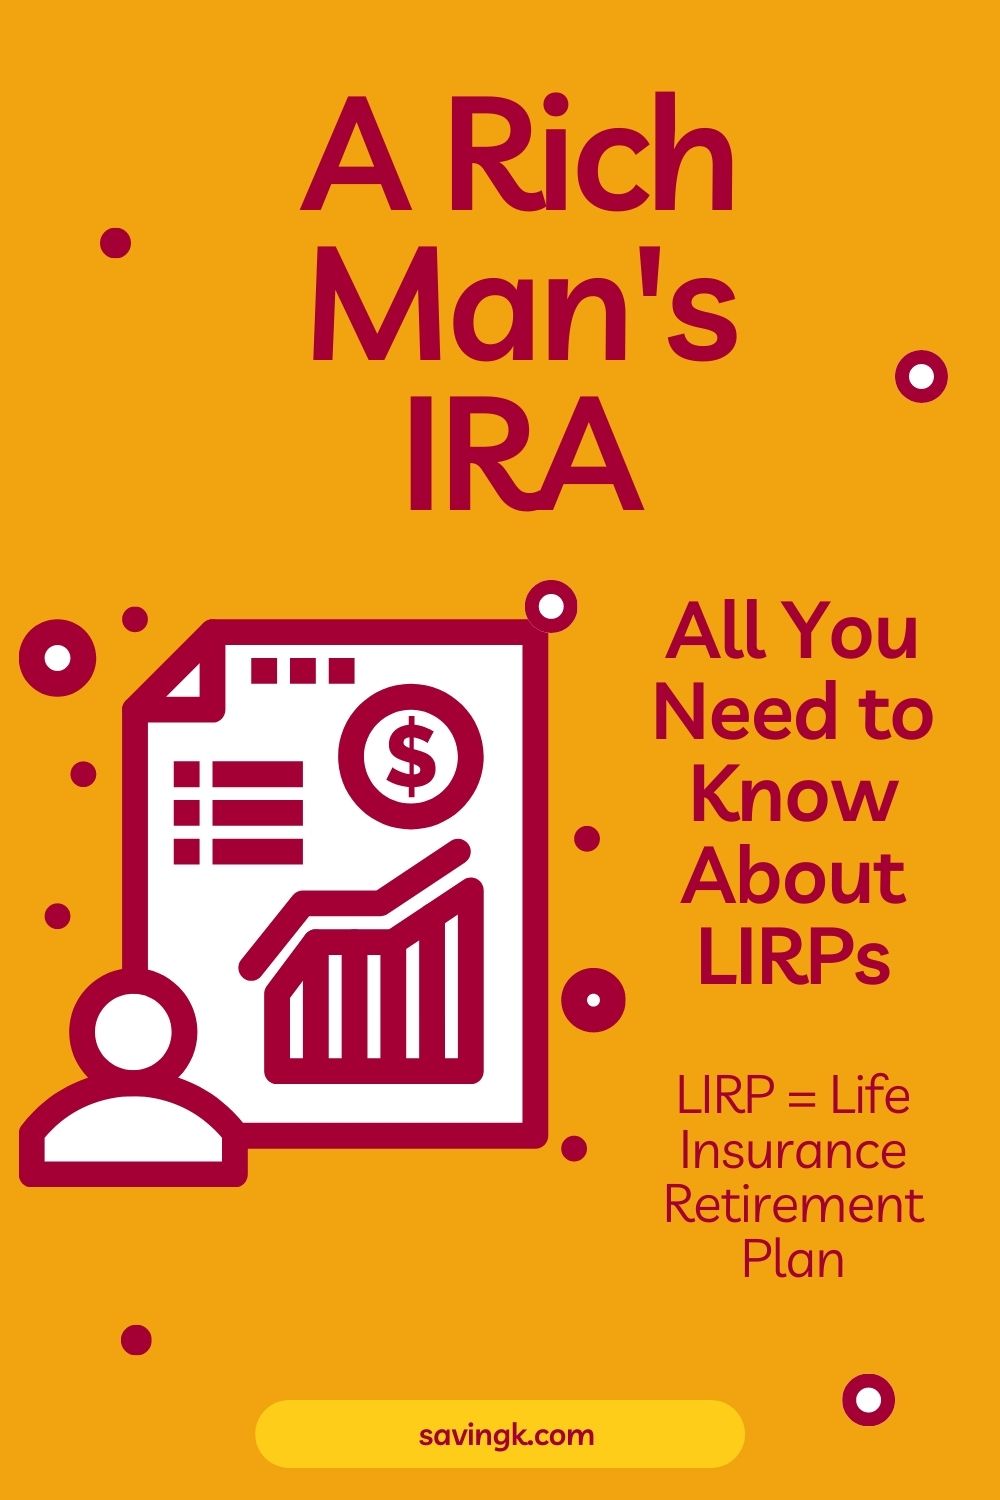 All You Need to Know About LIRPs